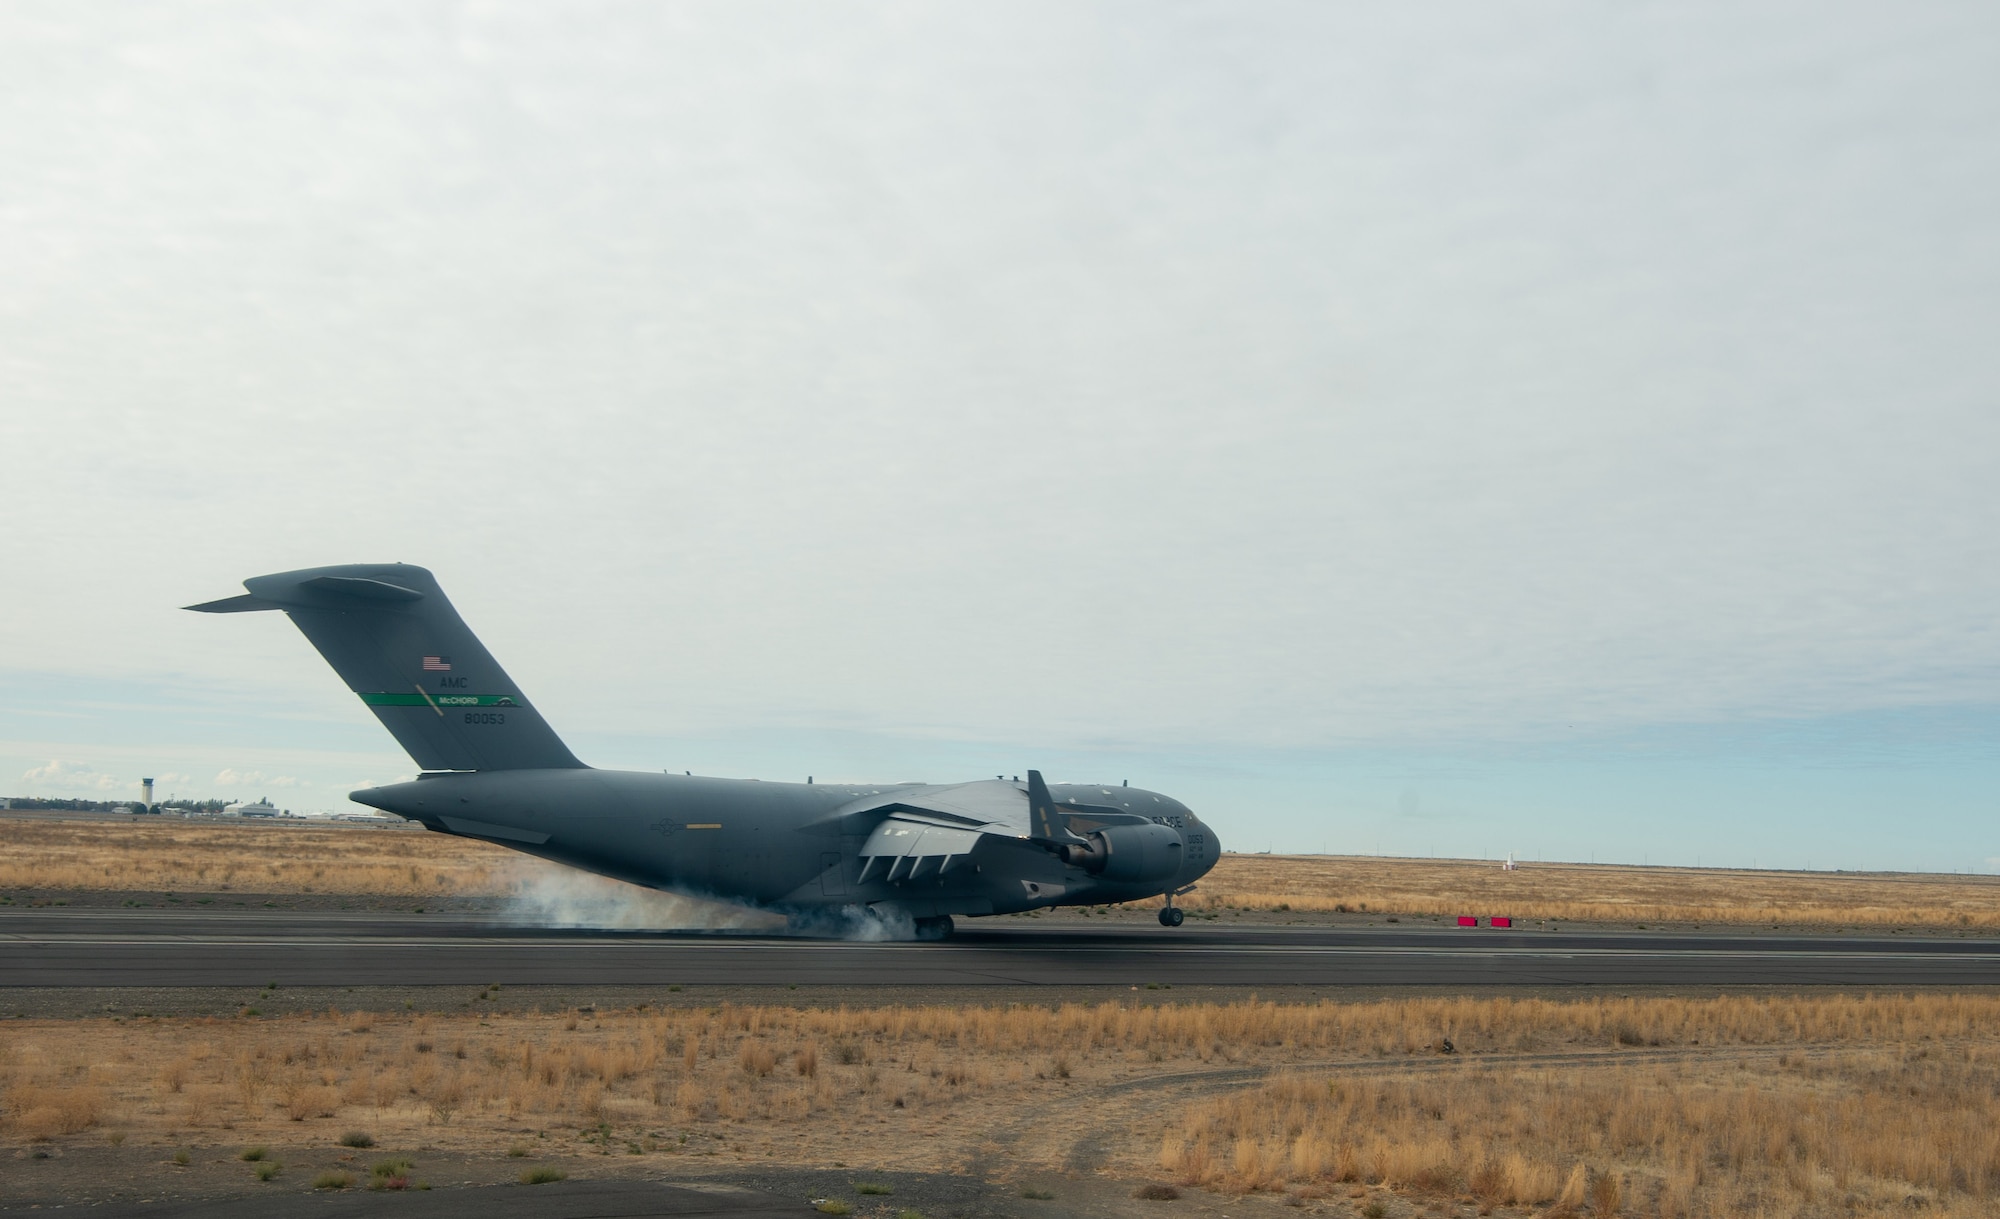 A C-17 Globemaster III comes in to land at Moses Lake Municipal Airport, Wash., Oct. 1, 2019. Two C-17s from McChord Field flew to Moses Lake to train Air Force pilots on a variety of aircraft landings and for Army Soldiers to test their long-range communication equipment. (U.S. Air Force photo by Senior Airman Tryphena Mayhugh)